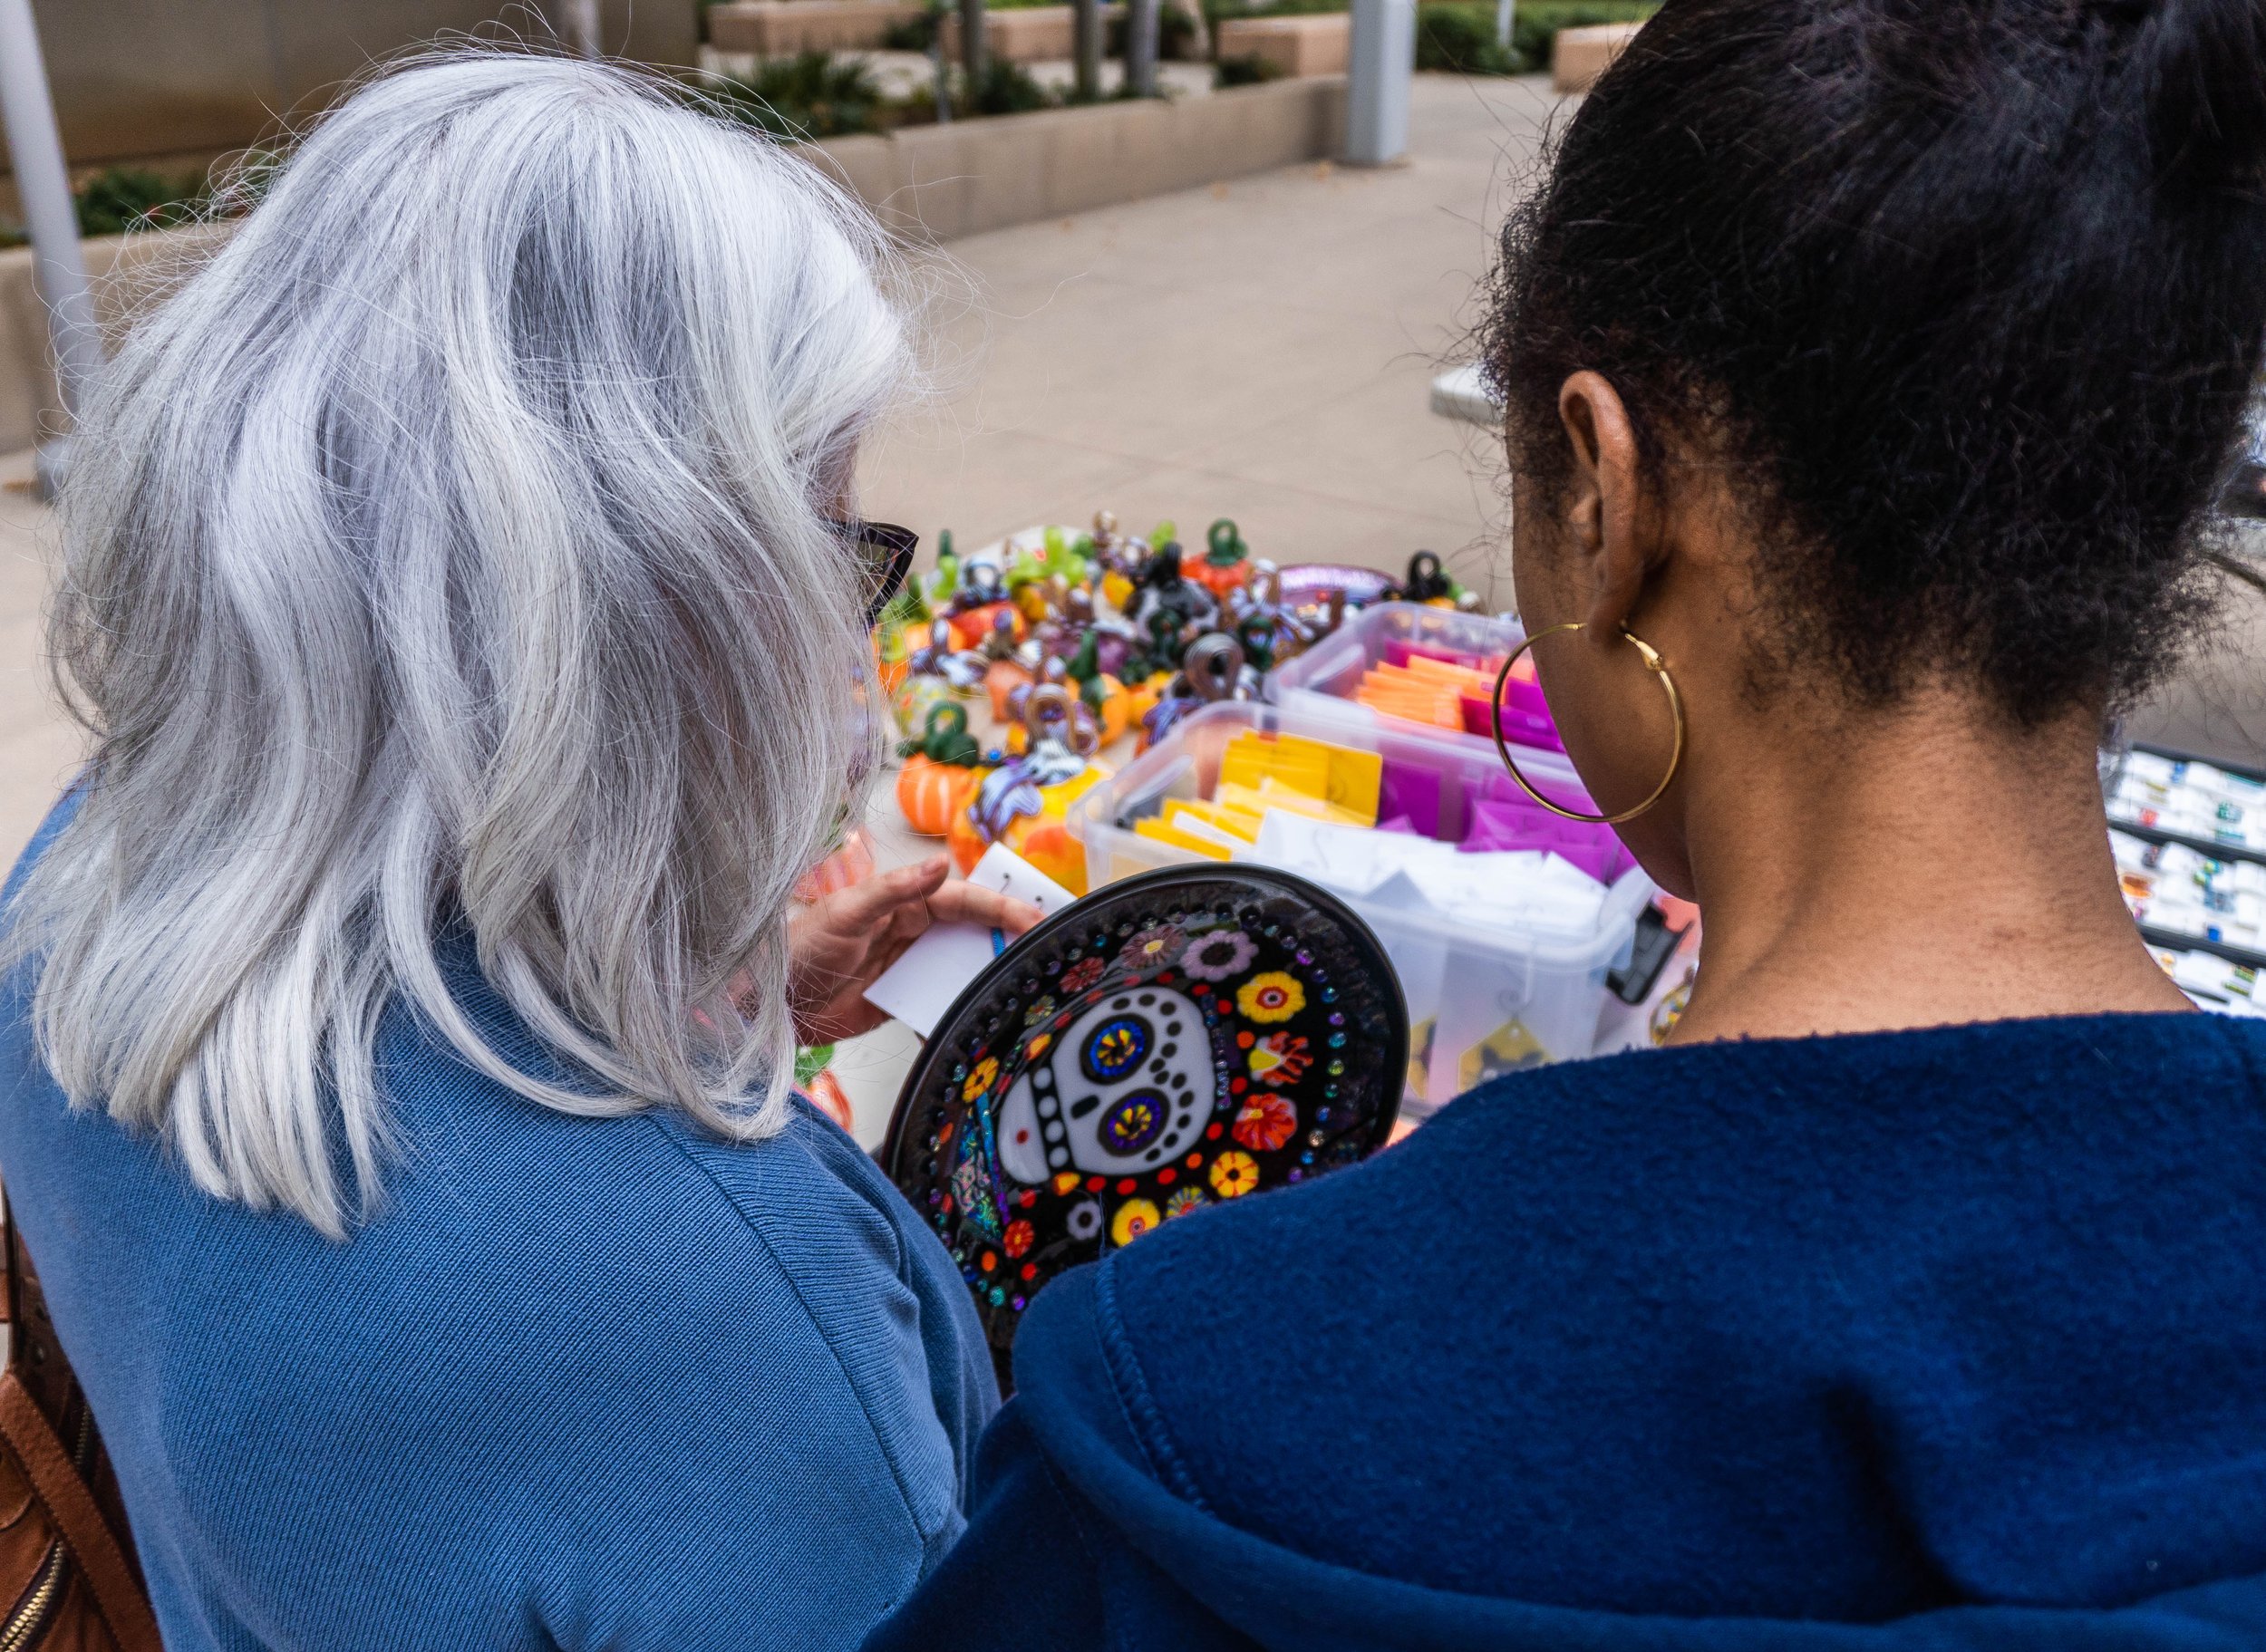  Anisha DiGregorio, Santa Monica College (SMC) Human Resource staff and Susan Caggiano, a faculty member of the English department look at a handmade plate for sale at the SMC Art Department's annual Glass Pumpkin Sales. DiGregorio has been coming to